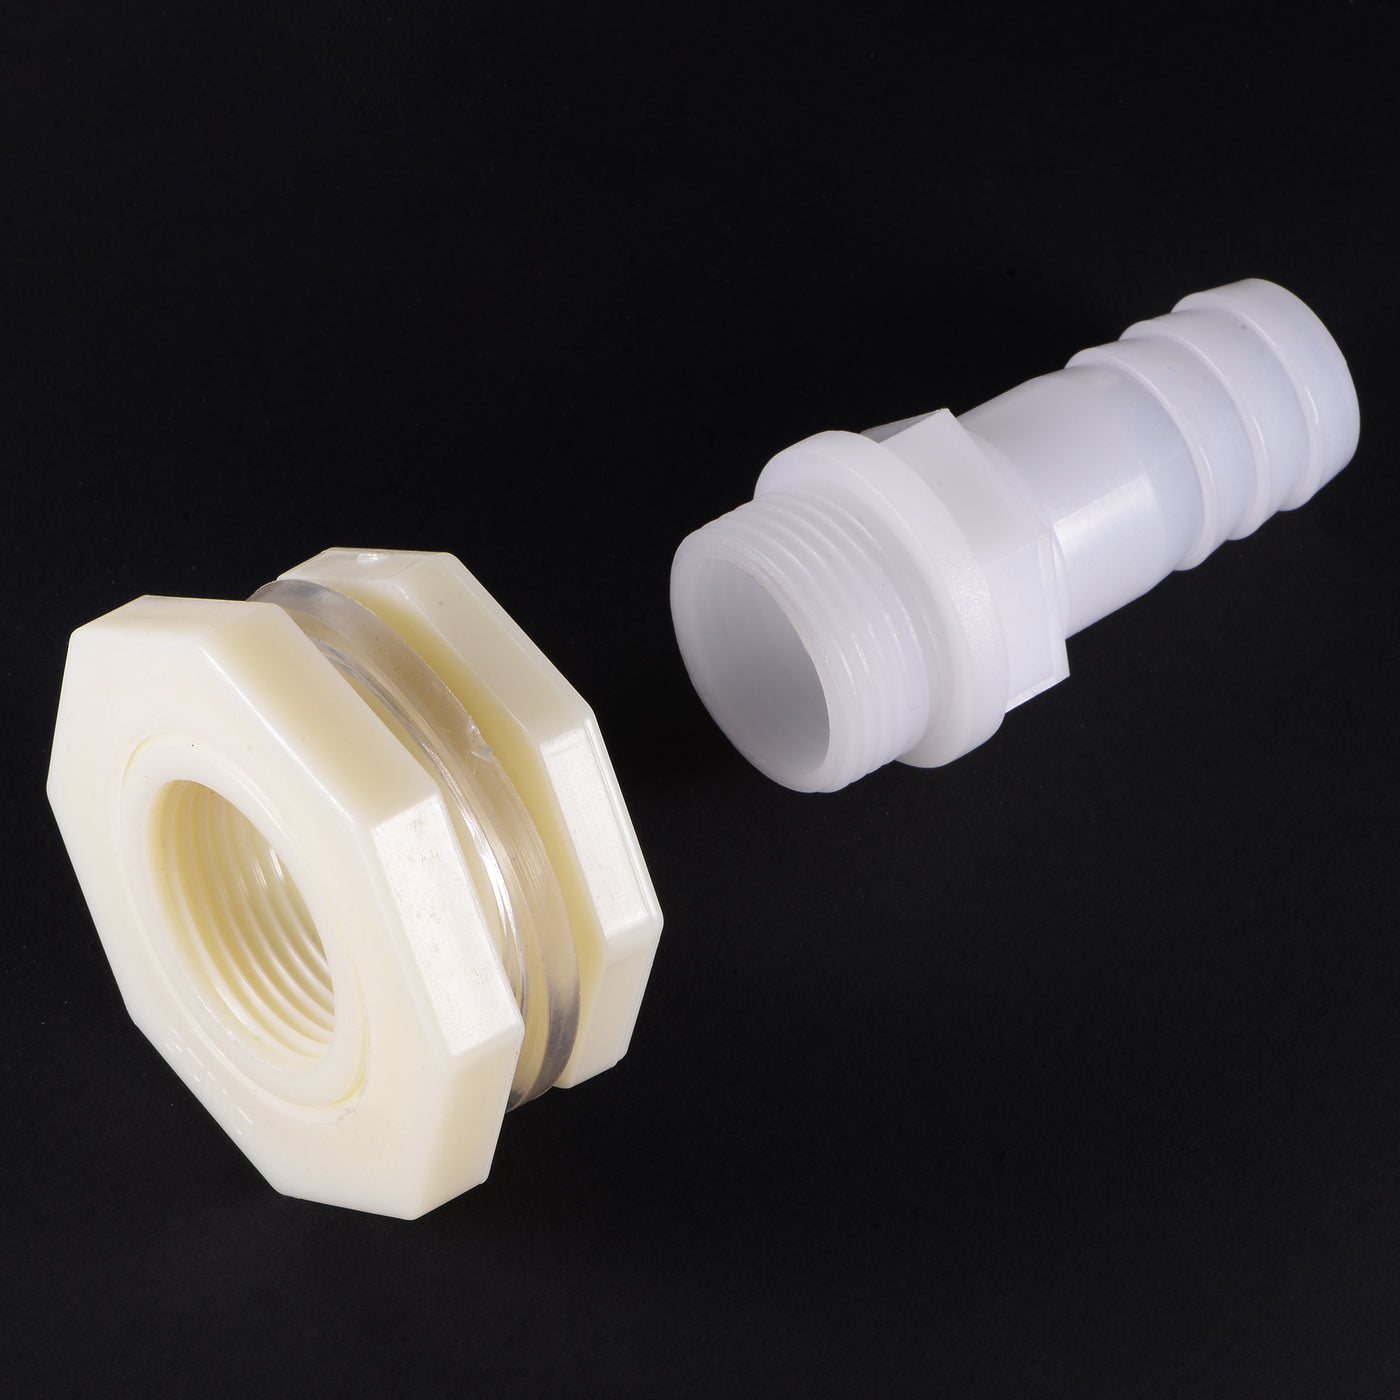 uxcell Uxcell Bulkhead Fitting Adapter 25mm Barbed x G1 Female ABS White for Aquariums, Water Tanks, Tubs, Pools